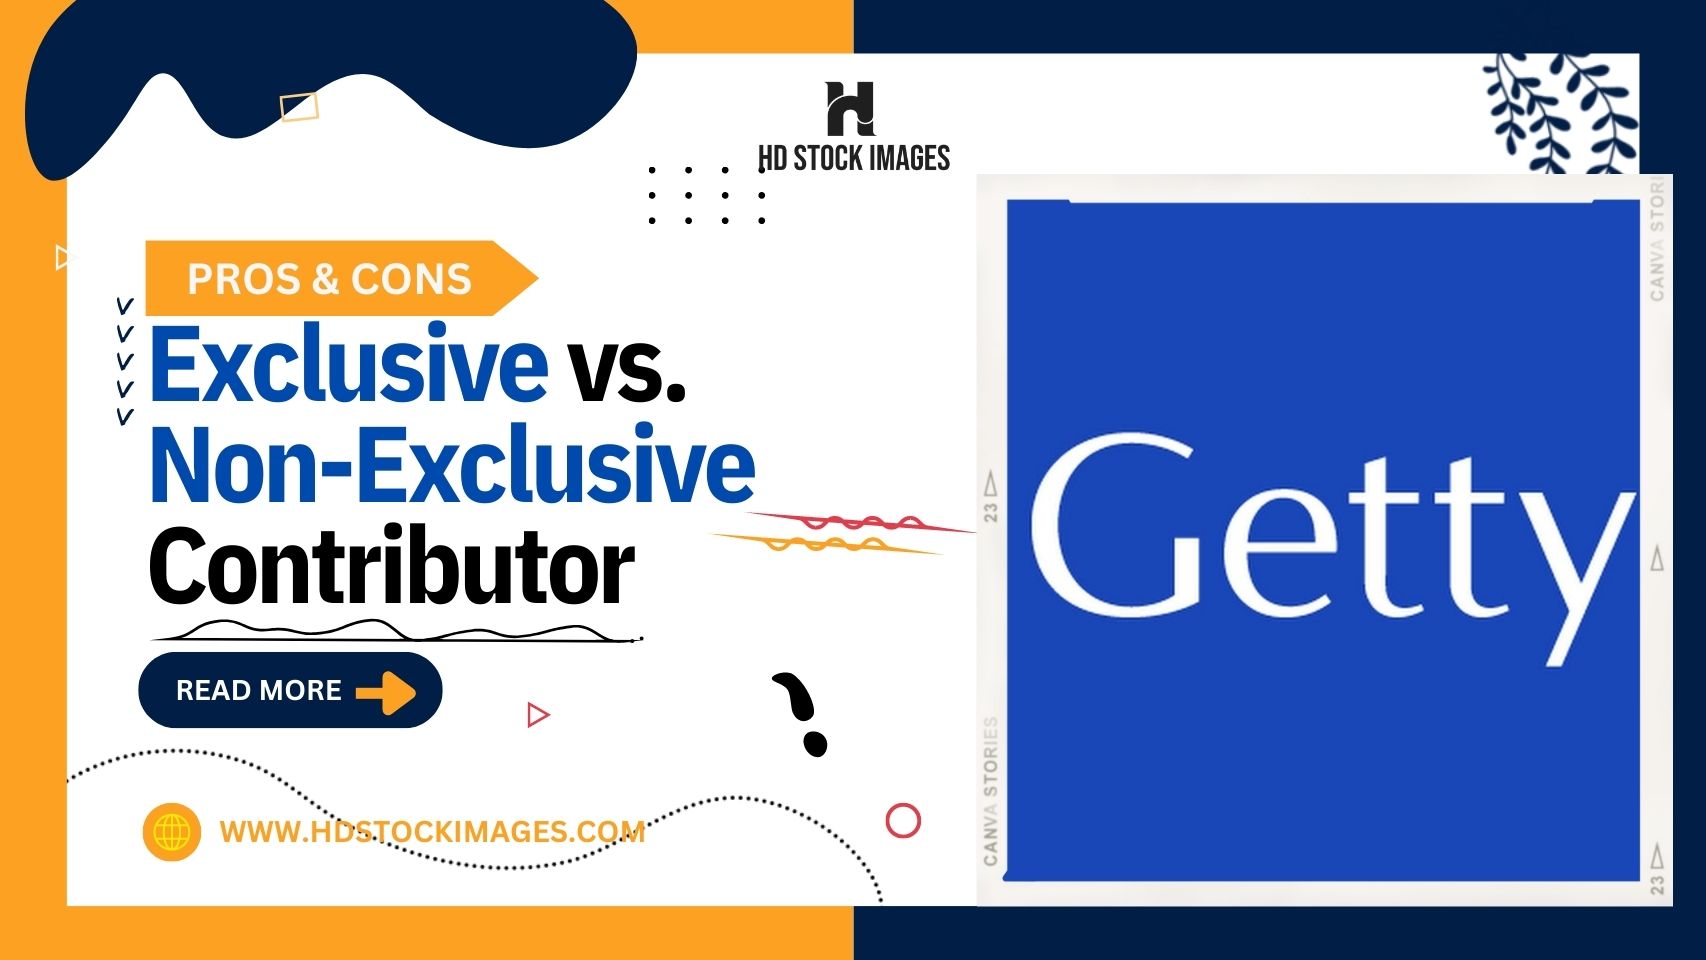 An image of Exclusive vs. Non-Exclusive Contributor on Getty Images: Pros and Cons